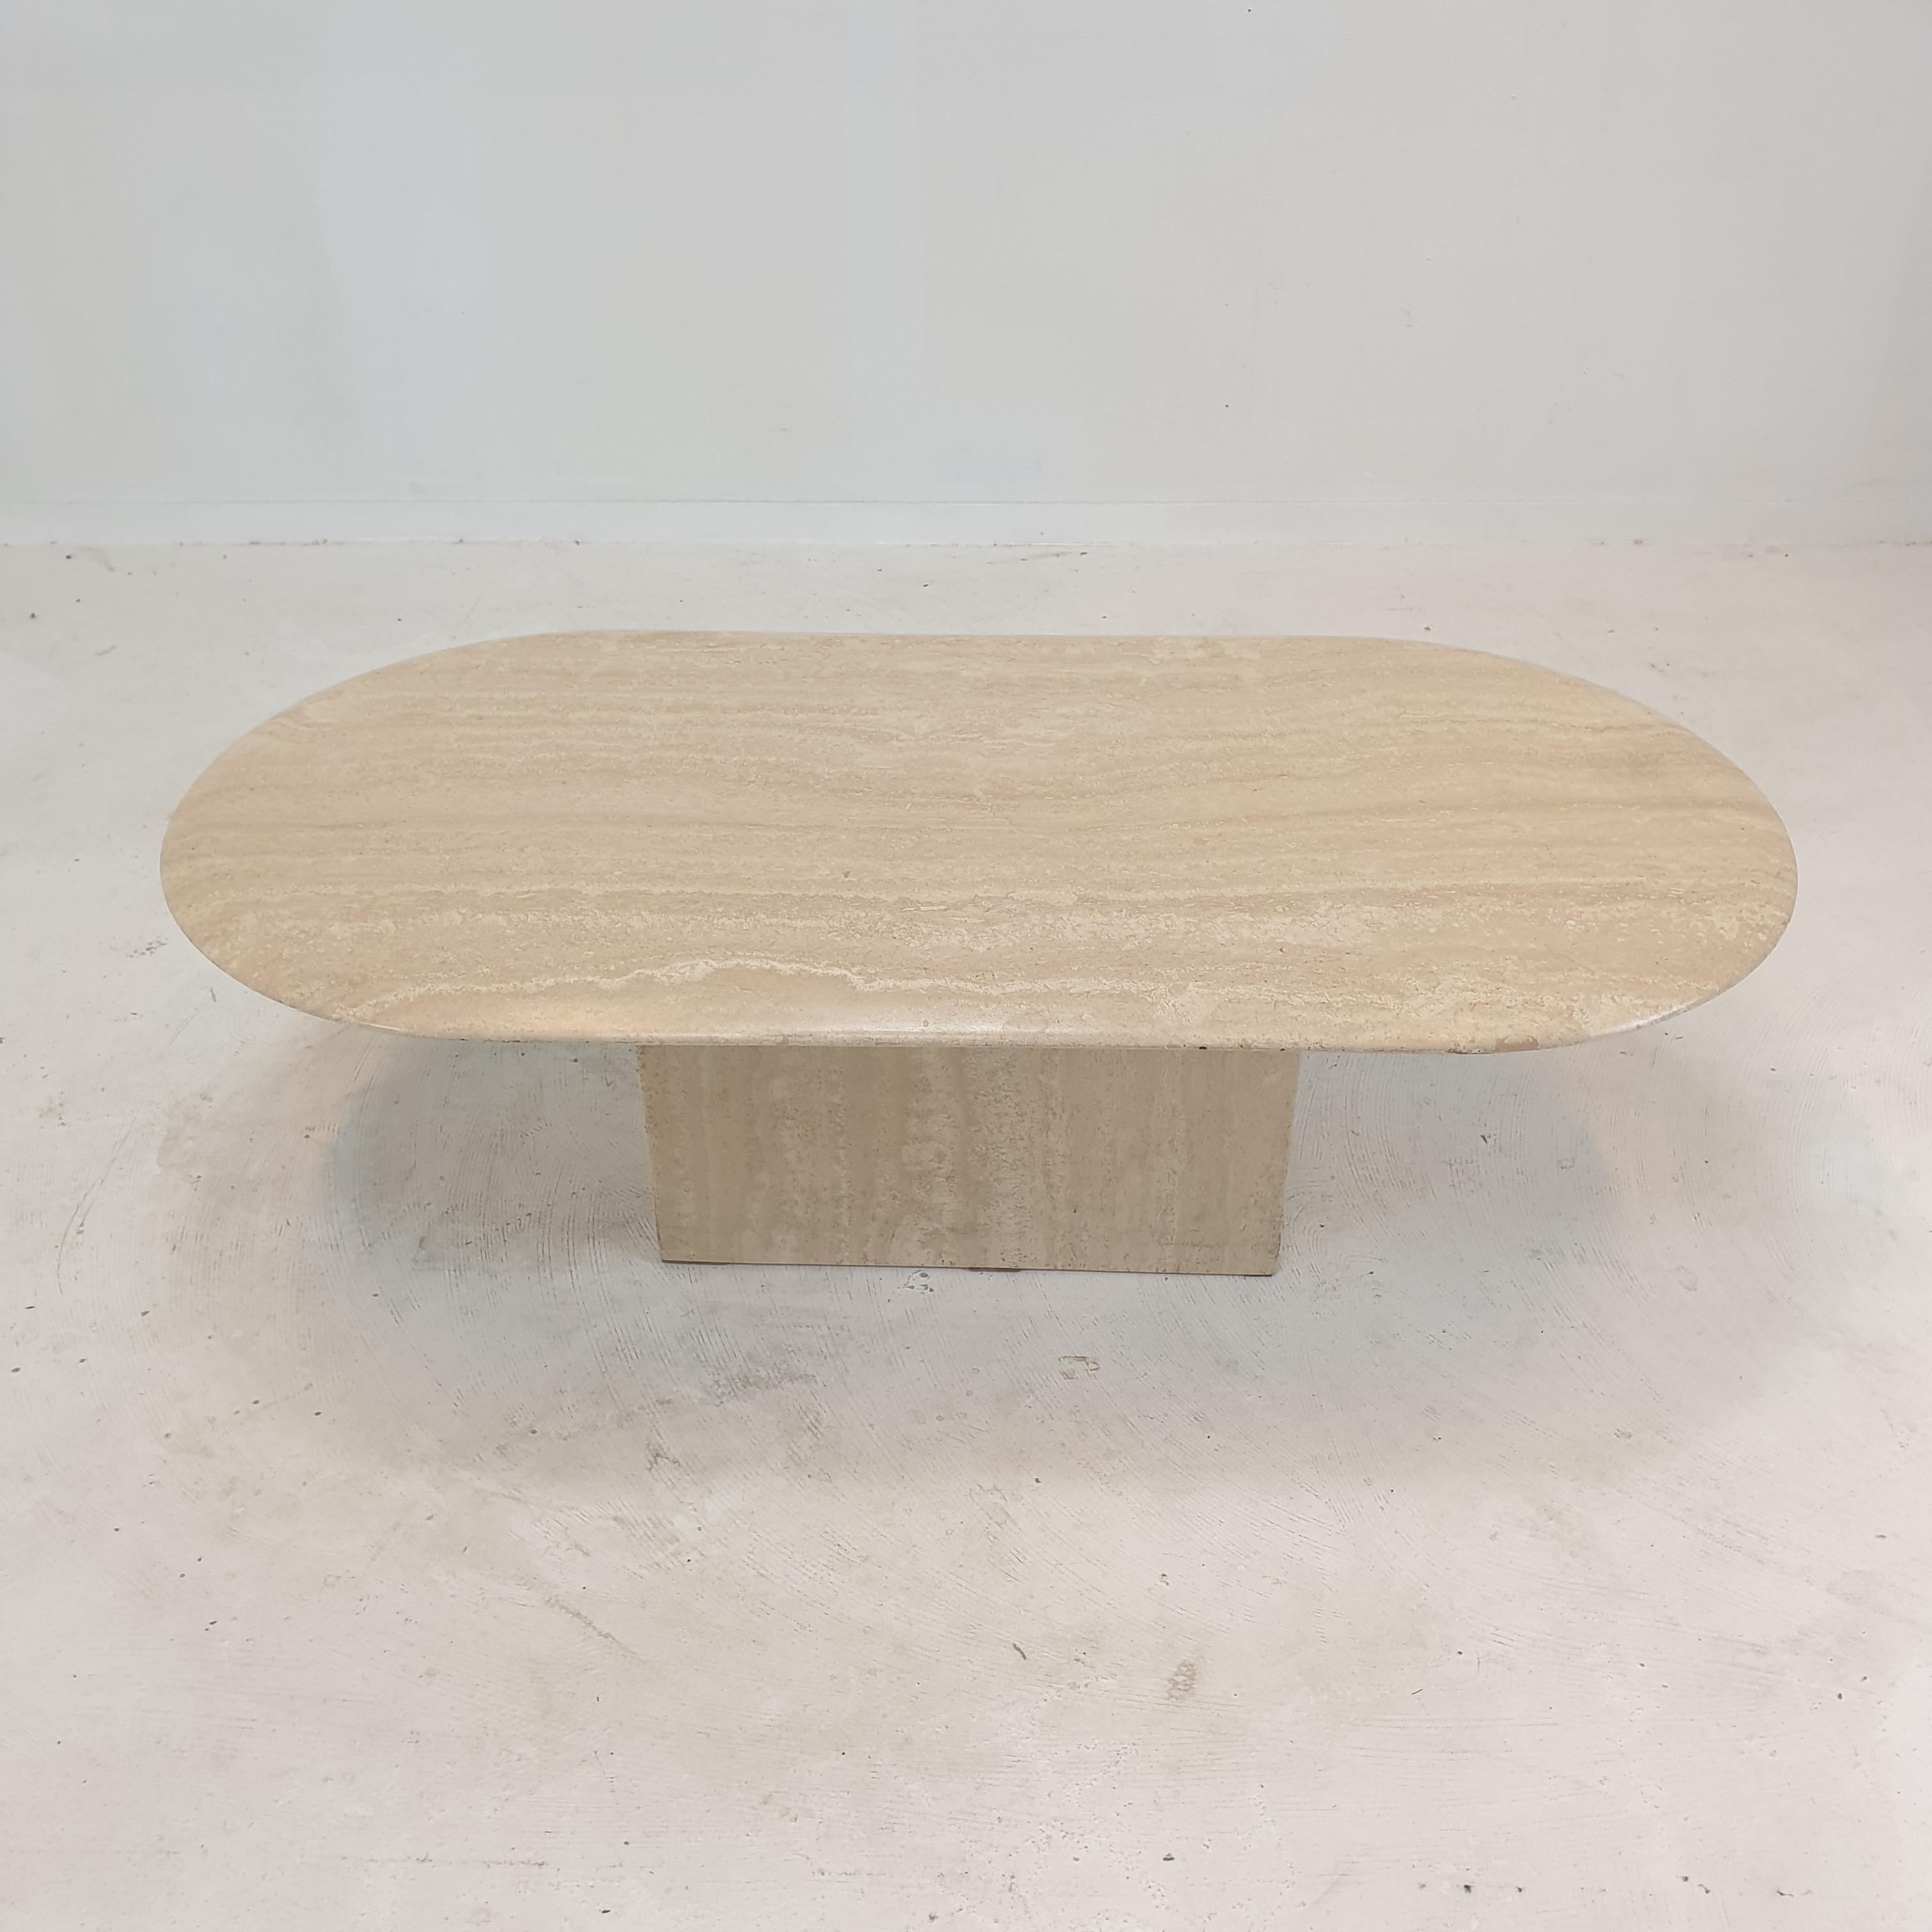 Italian Oval Coffee Table in Travertine, 1980s For Sale 1